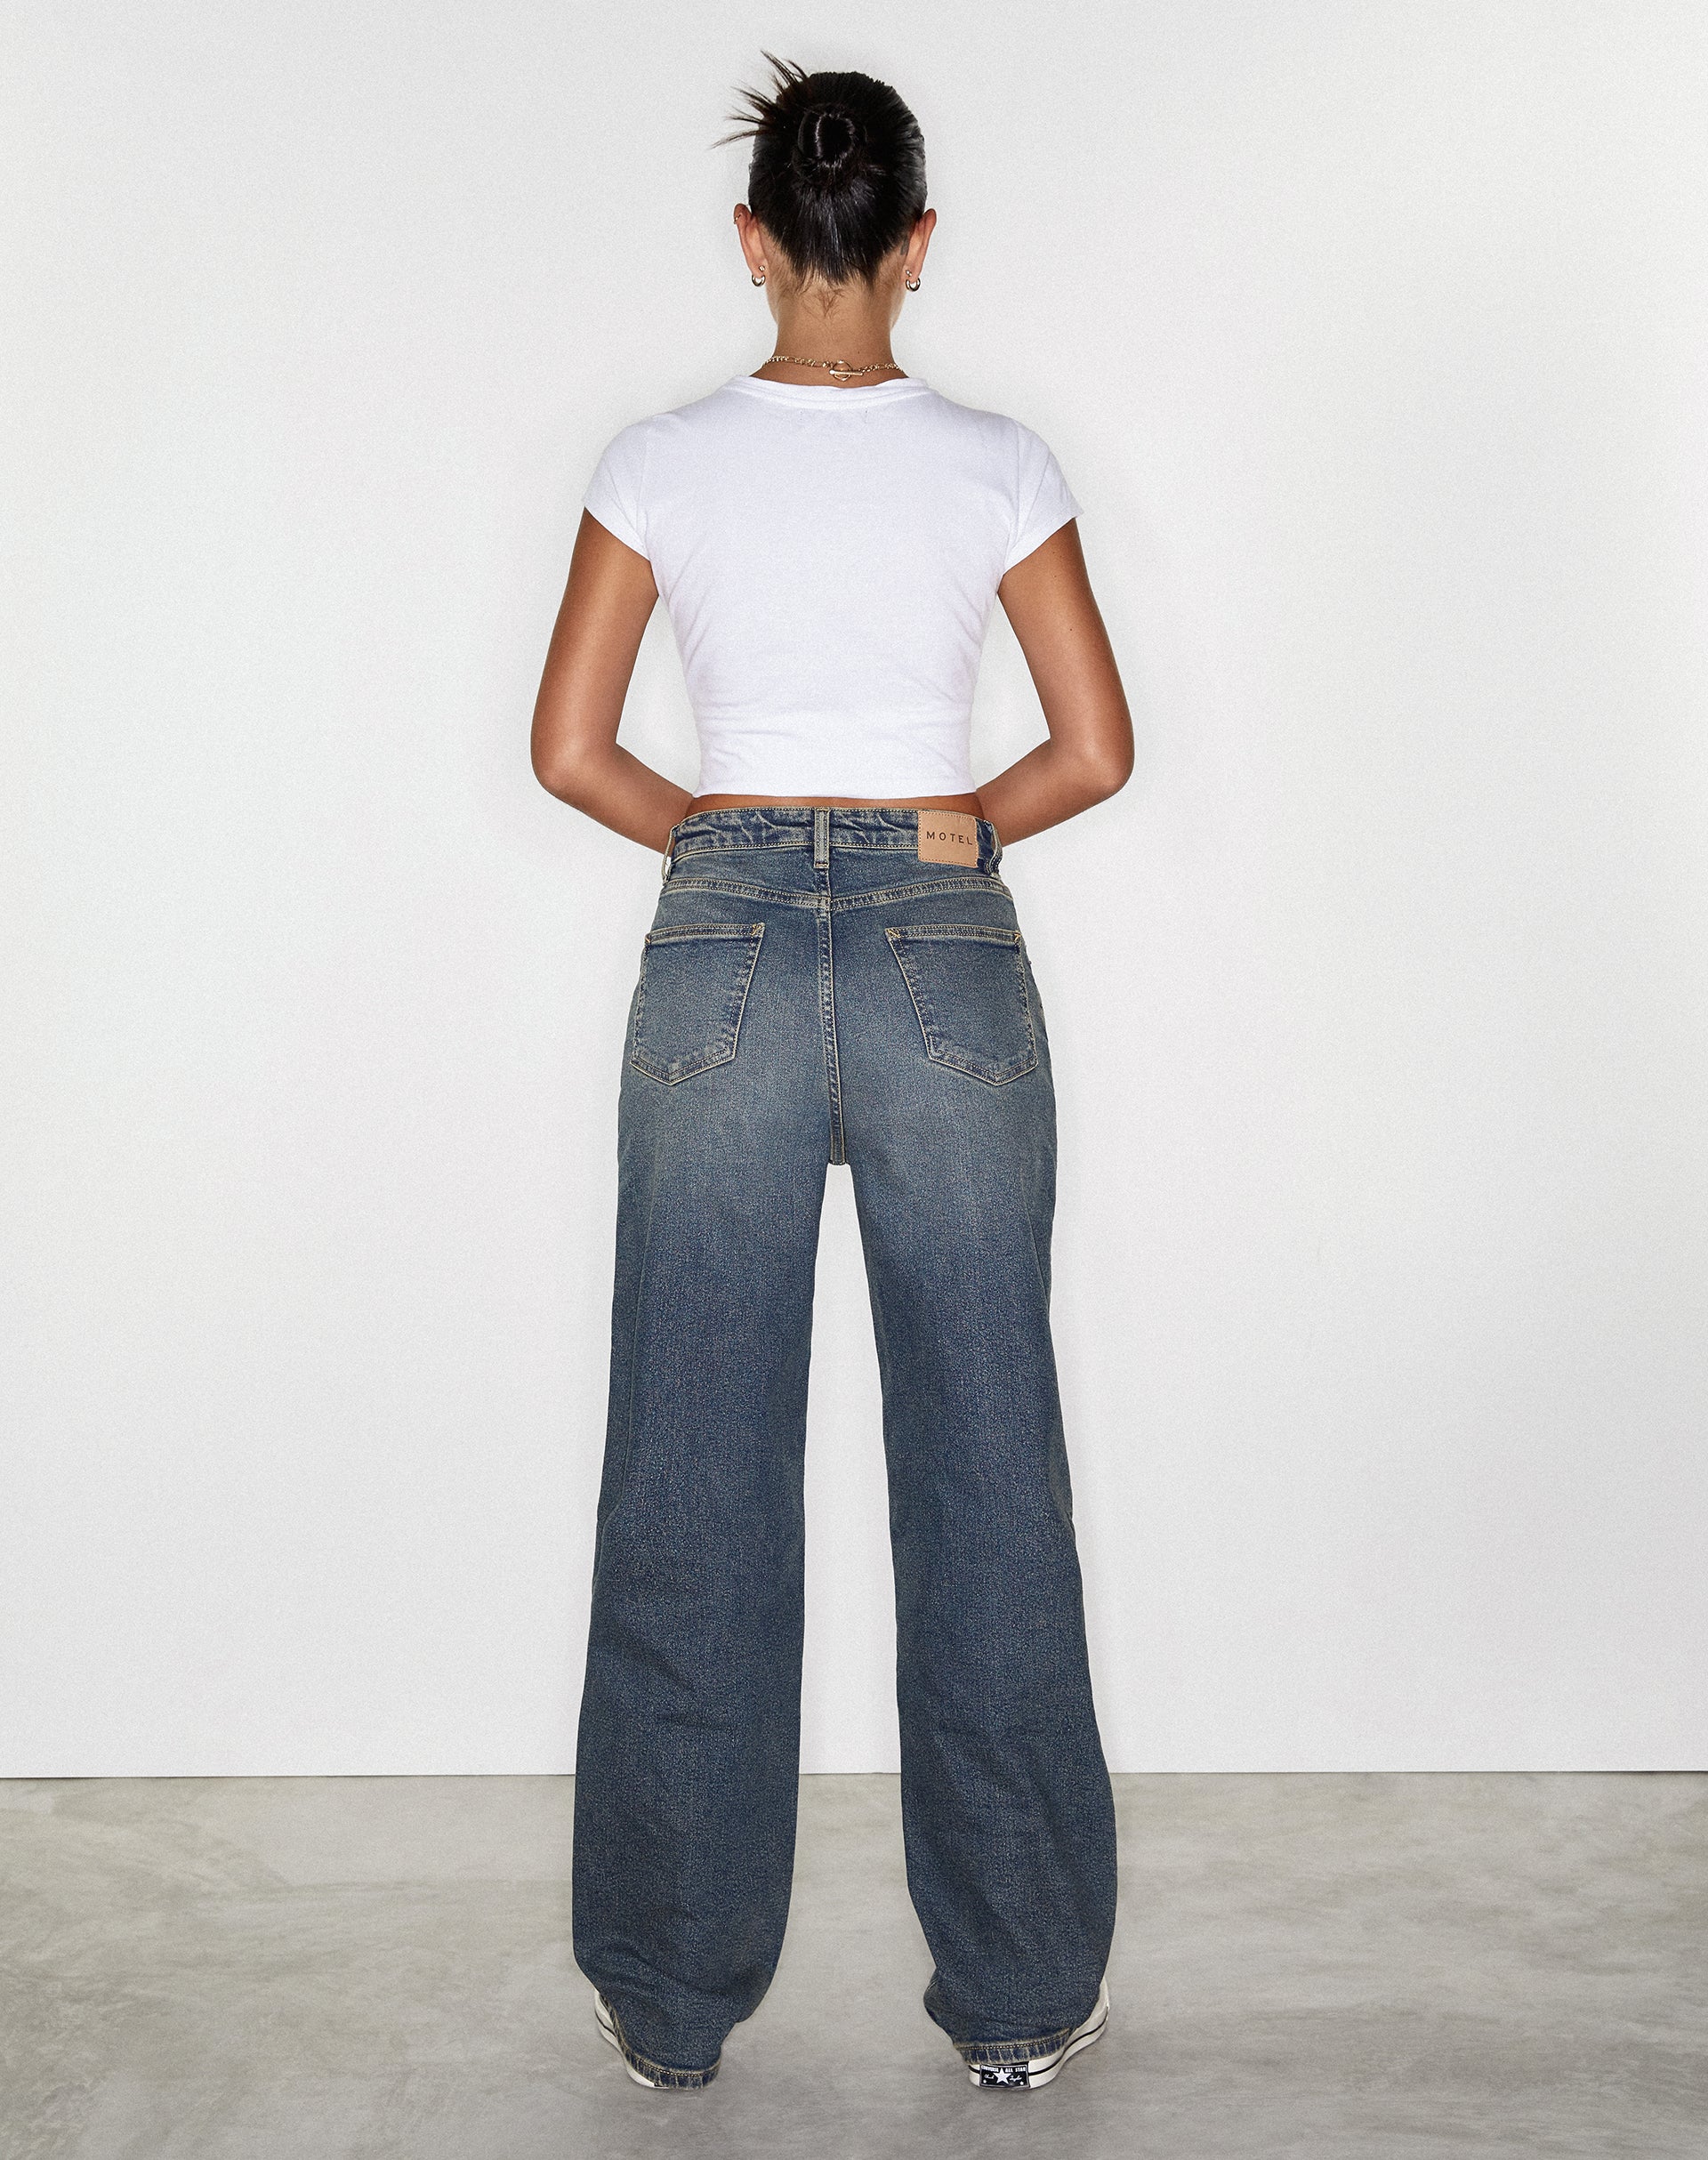 Parallel Jeans in Bryony Twilight Brown and Blue Acid